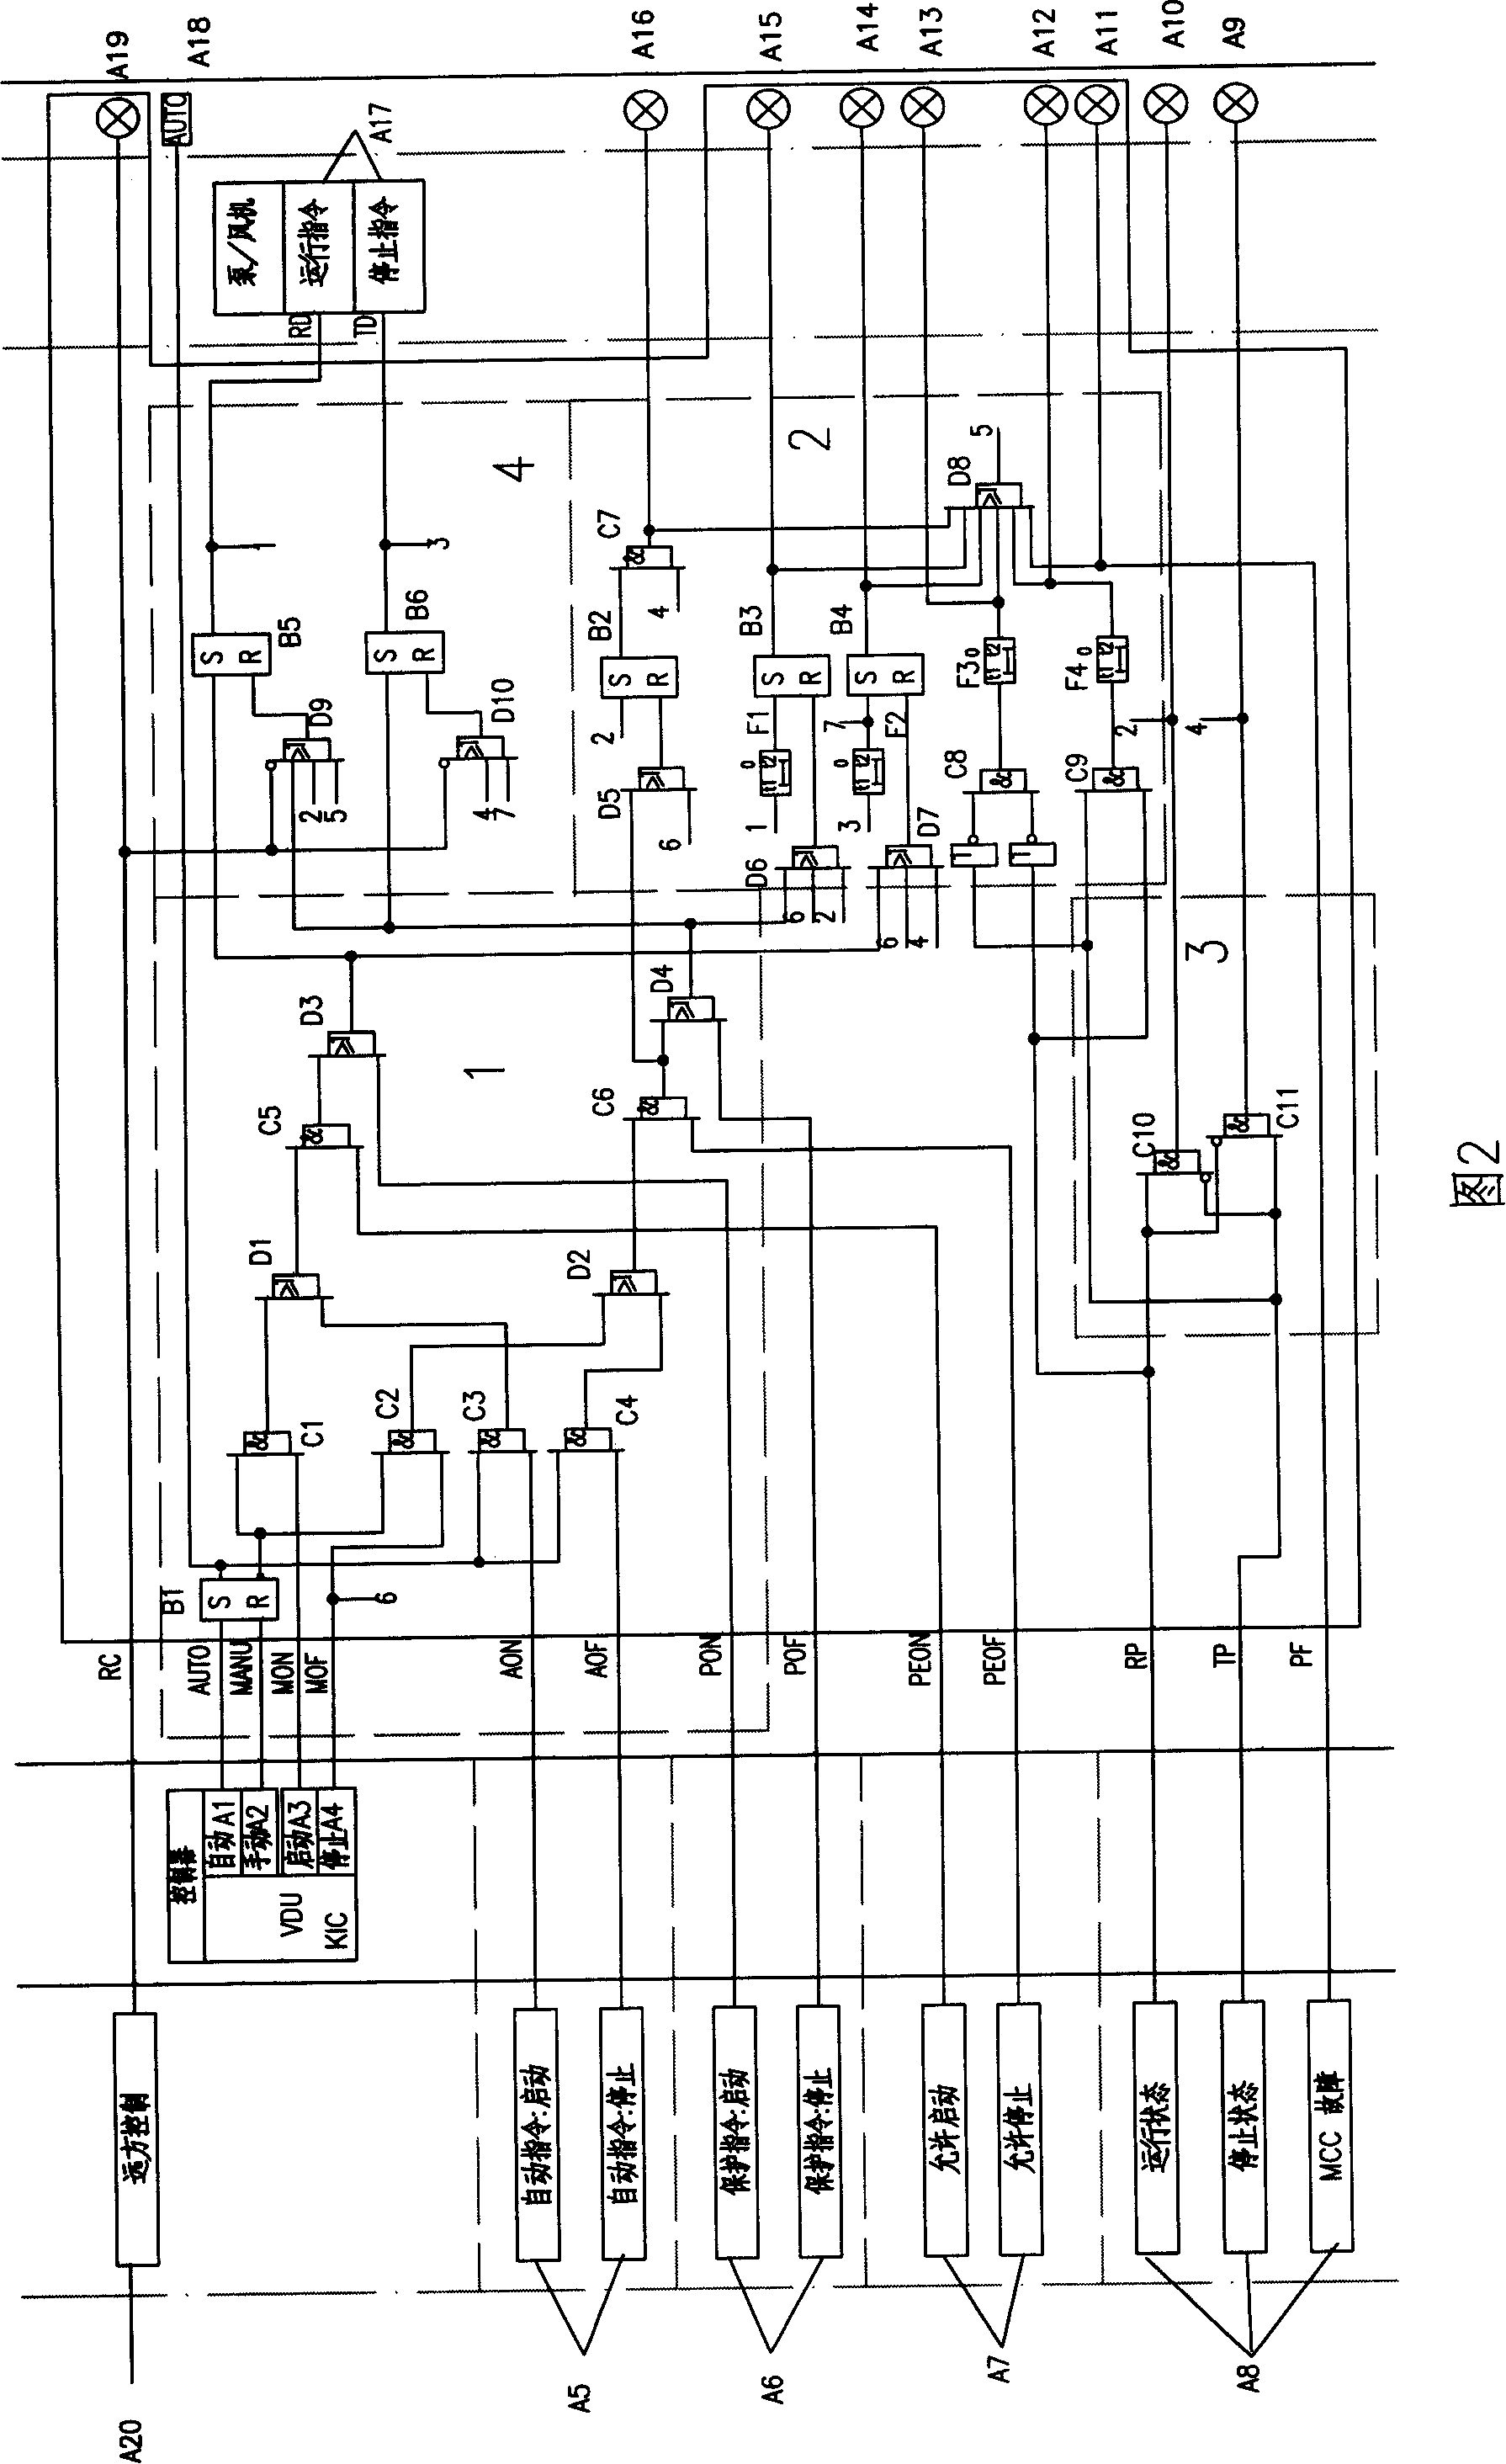 Special logic control device for nucleus electromotor unit drive